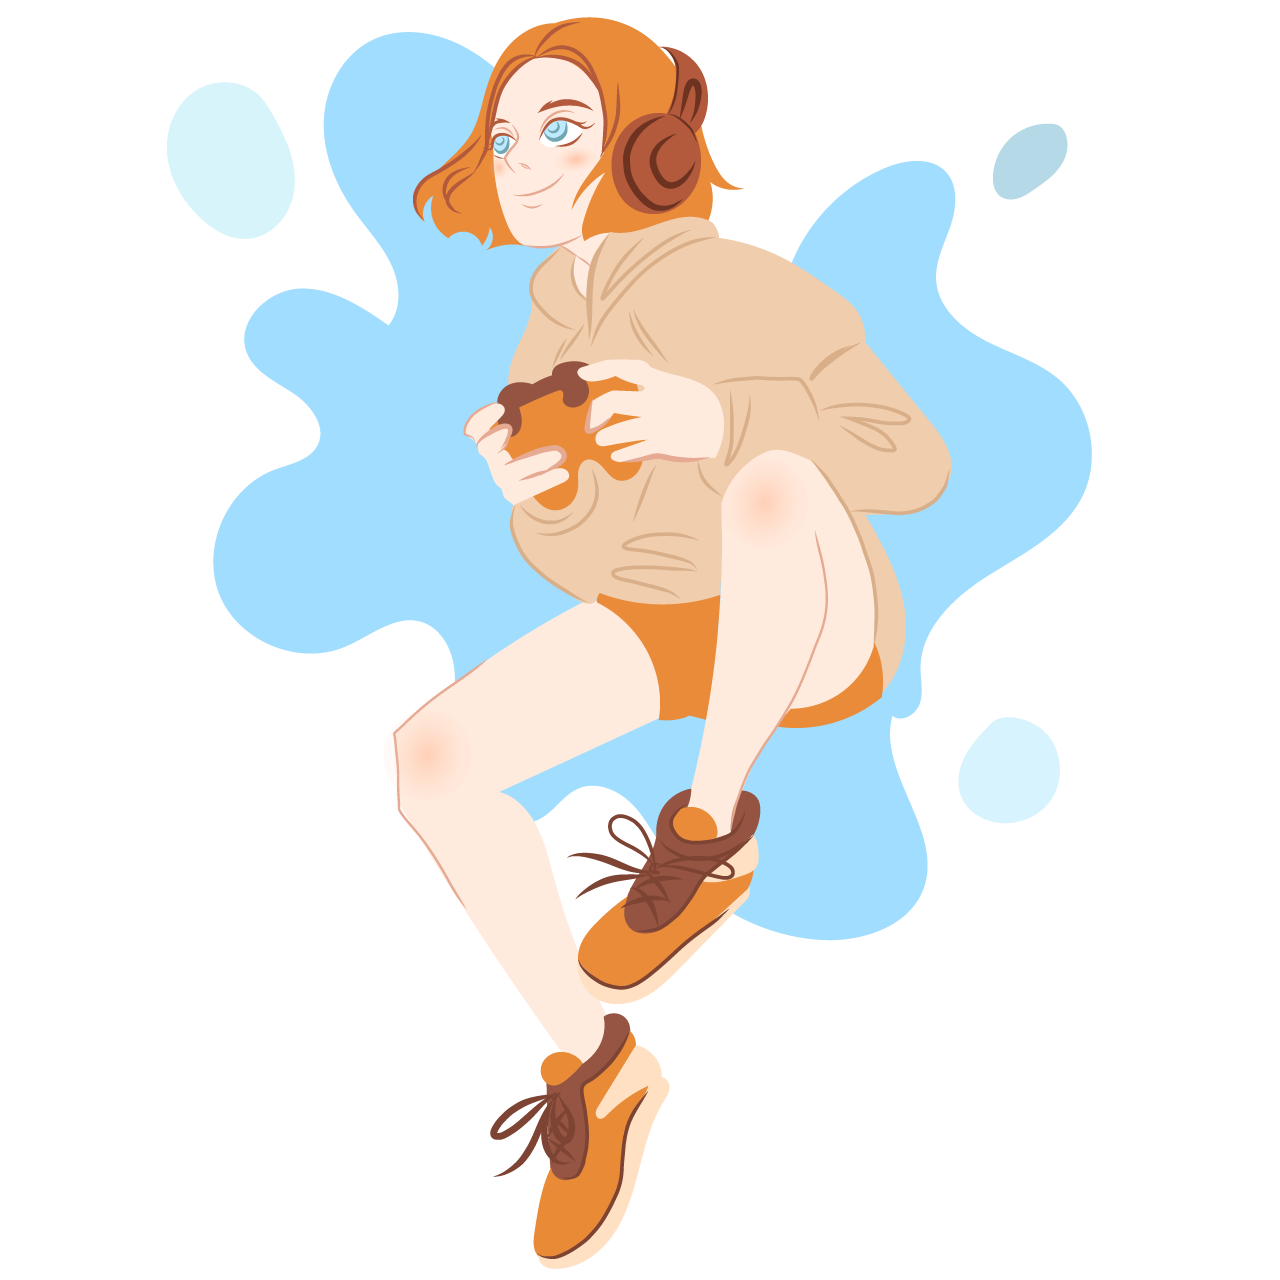 Girl plays computer games redhaired girl with joystick shorts white hoodie orange short shorts sneakers red knees illustratoin flat style